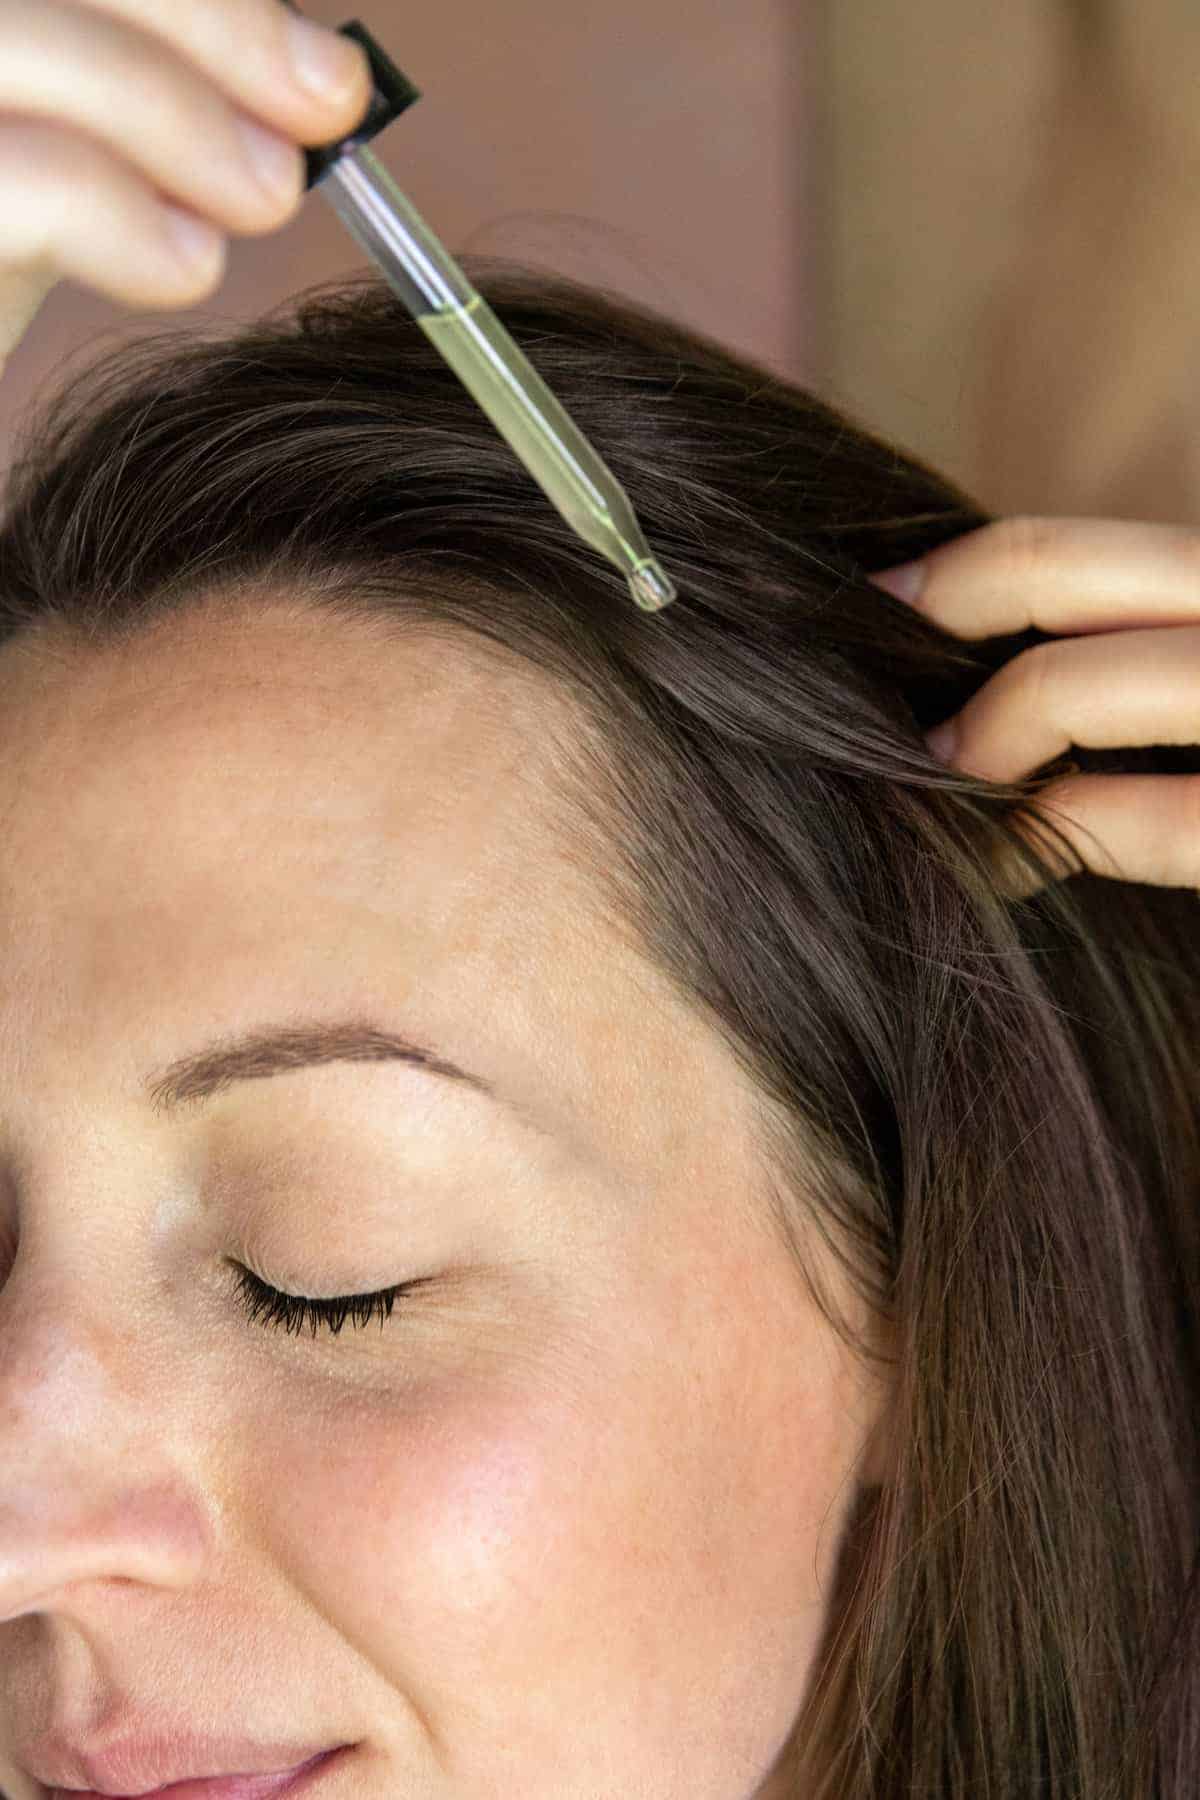 How To Use a Fenugreek Scalp Serum for Hair Growth